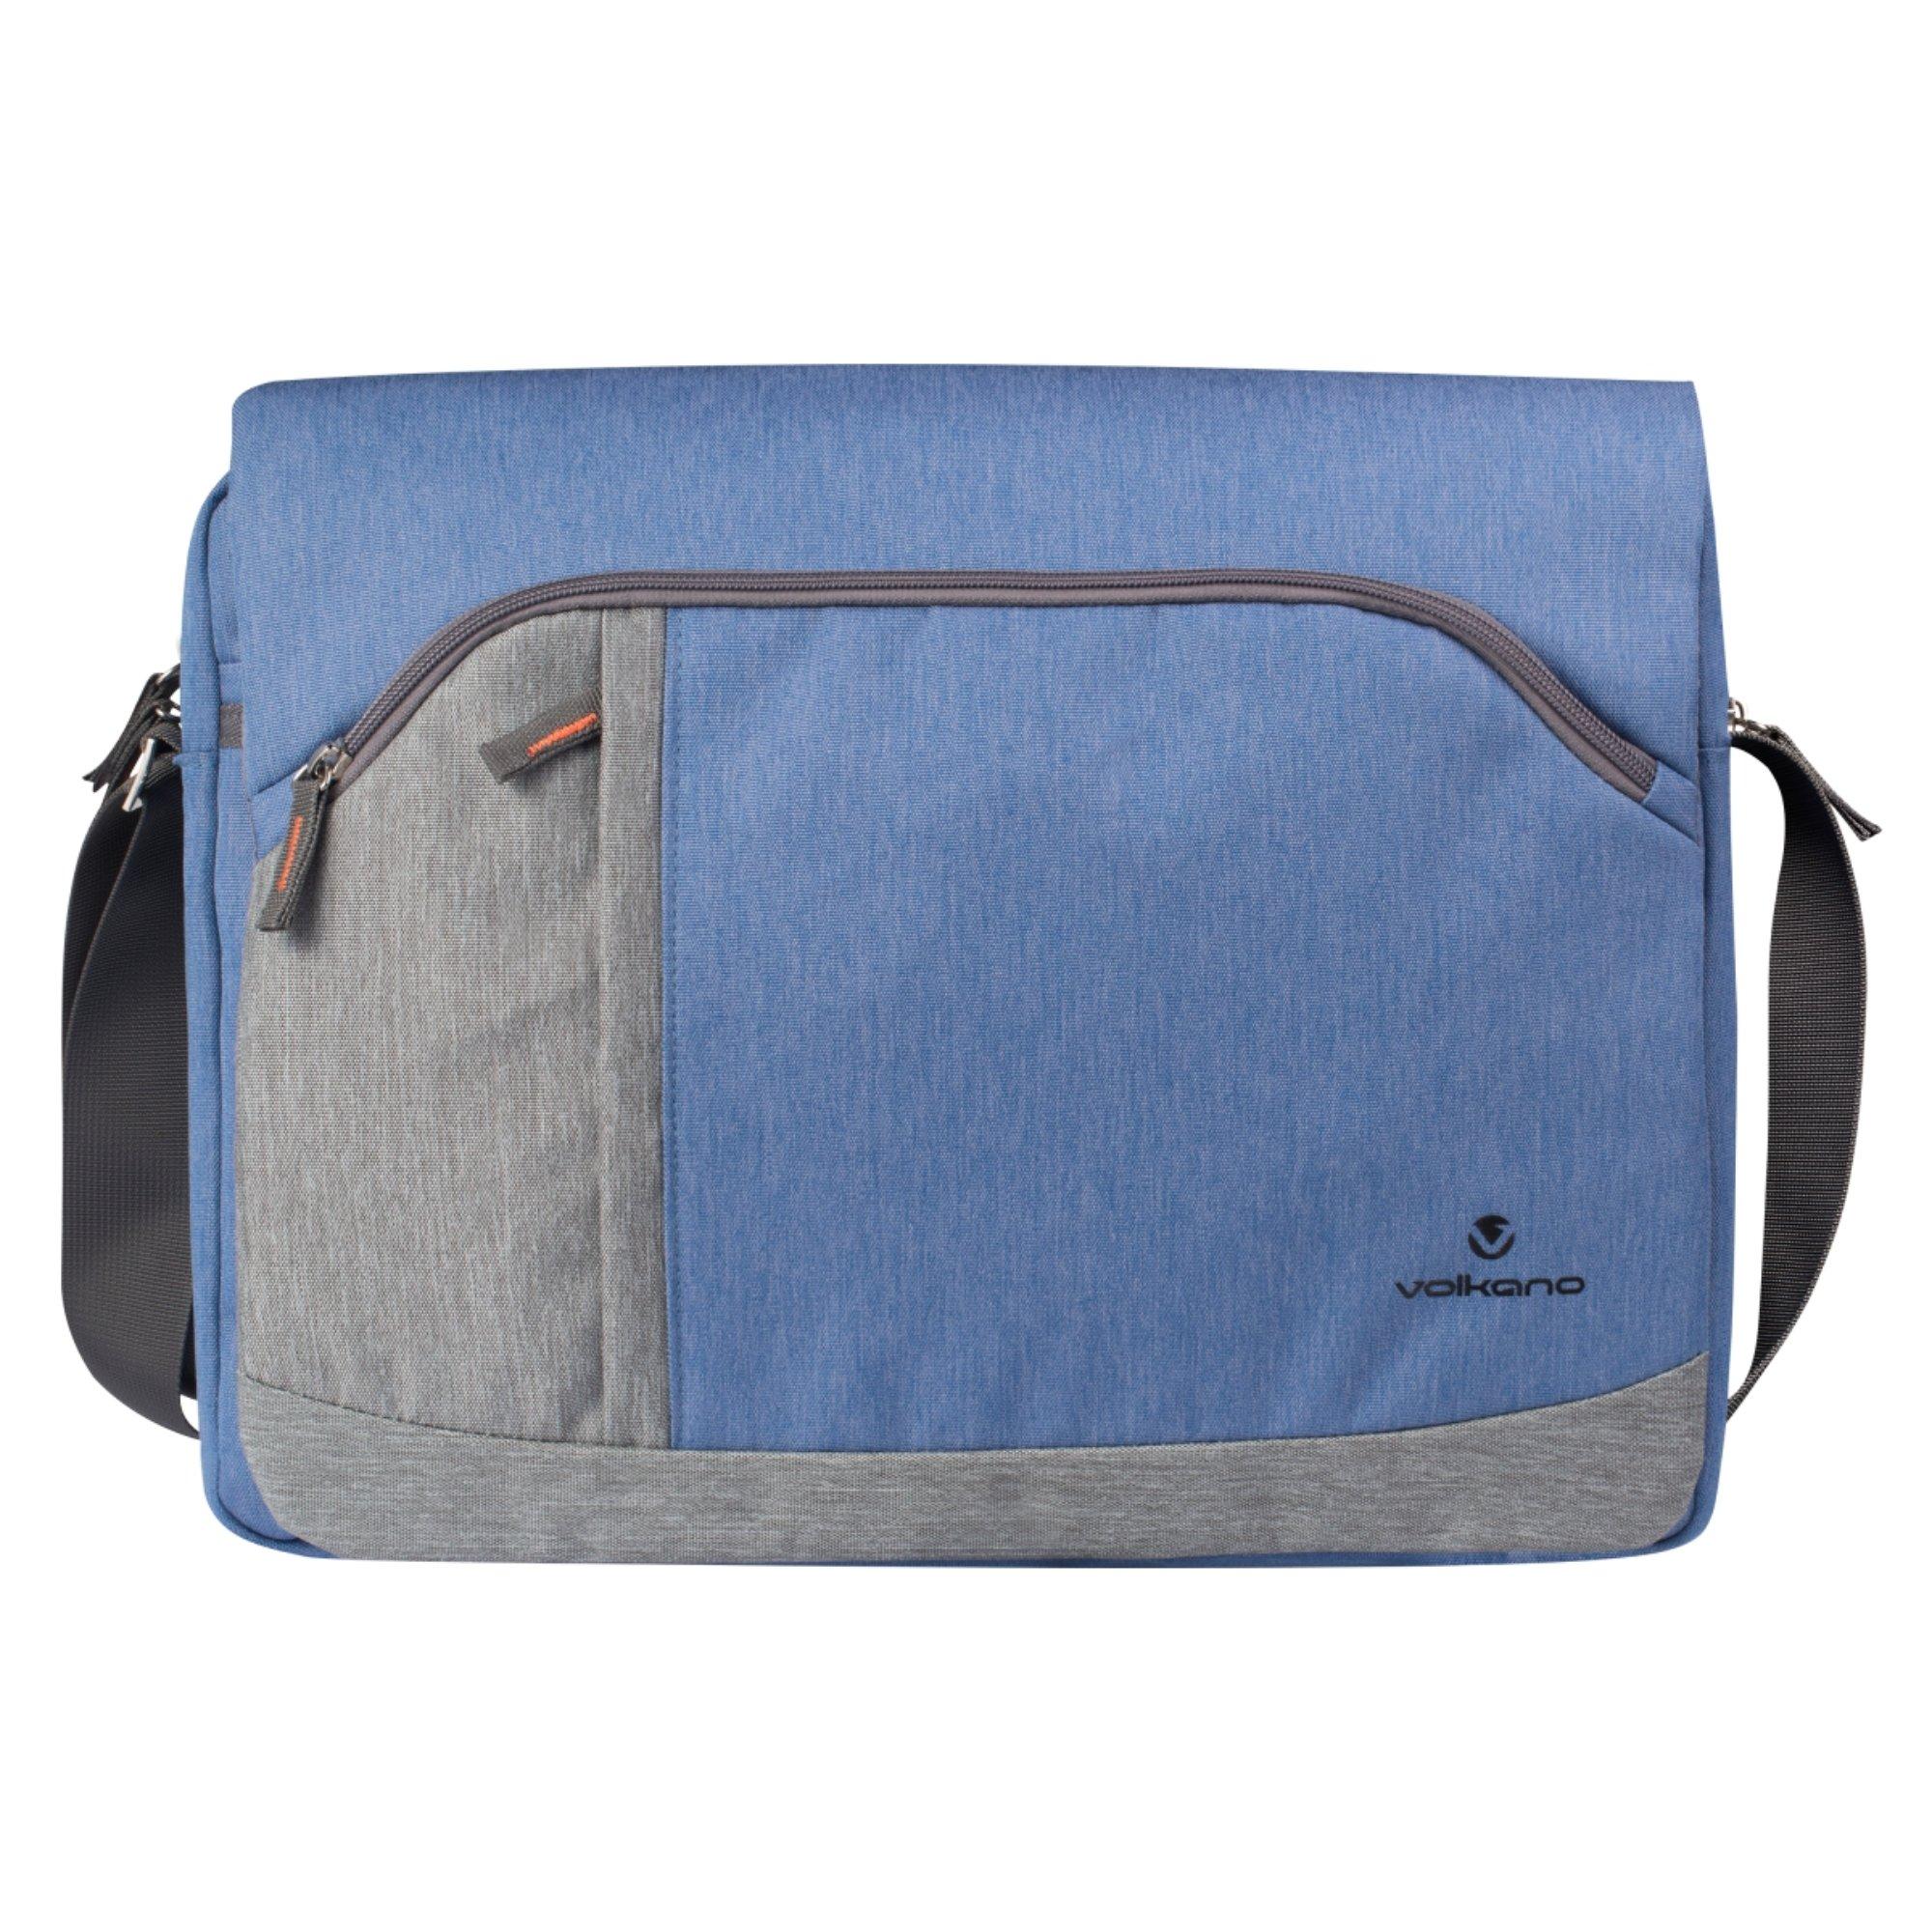 list item 1 of 1 Volkano Breeze Series Shoulder Bag for Laptops up to 15.6-in Blue/Grey